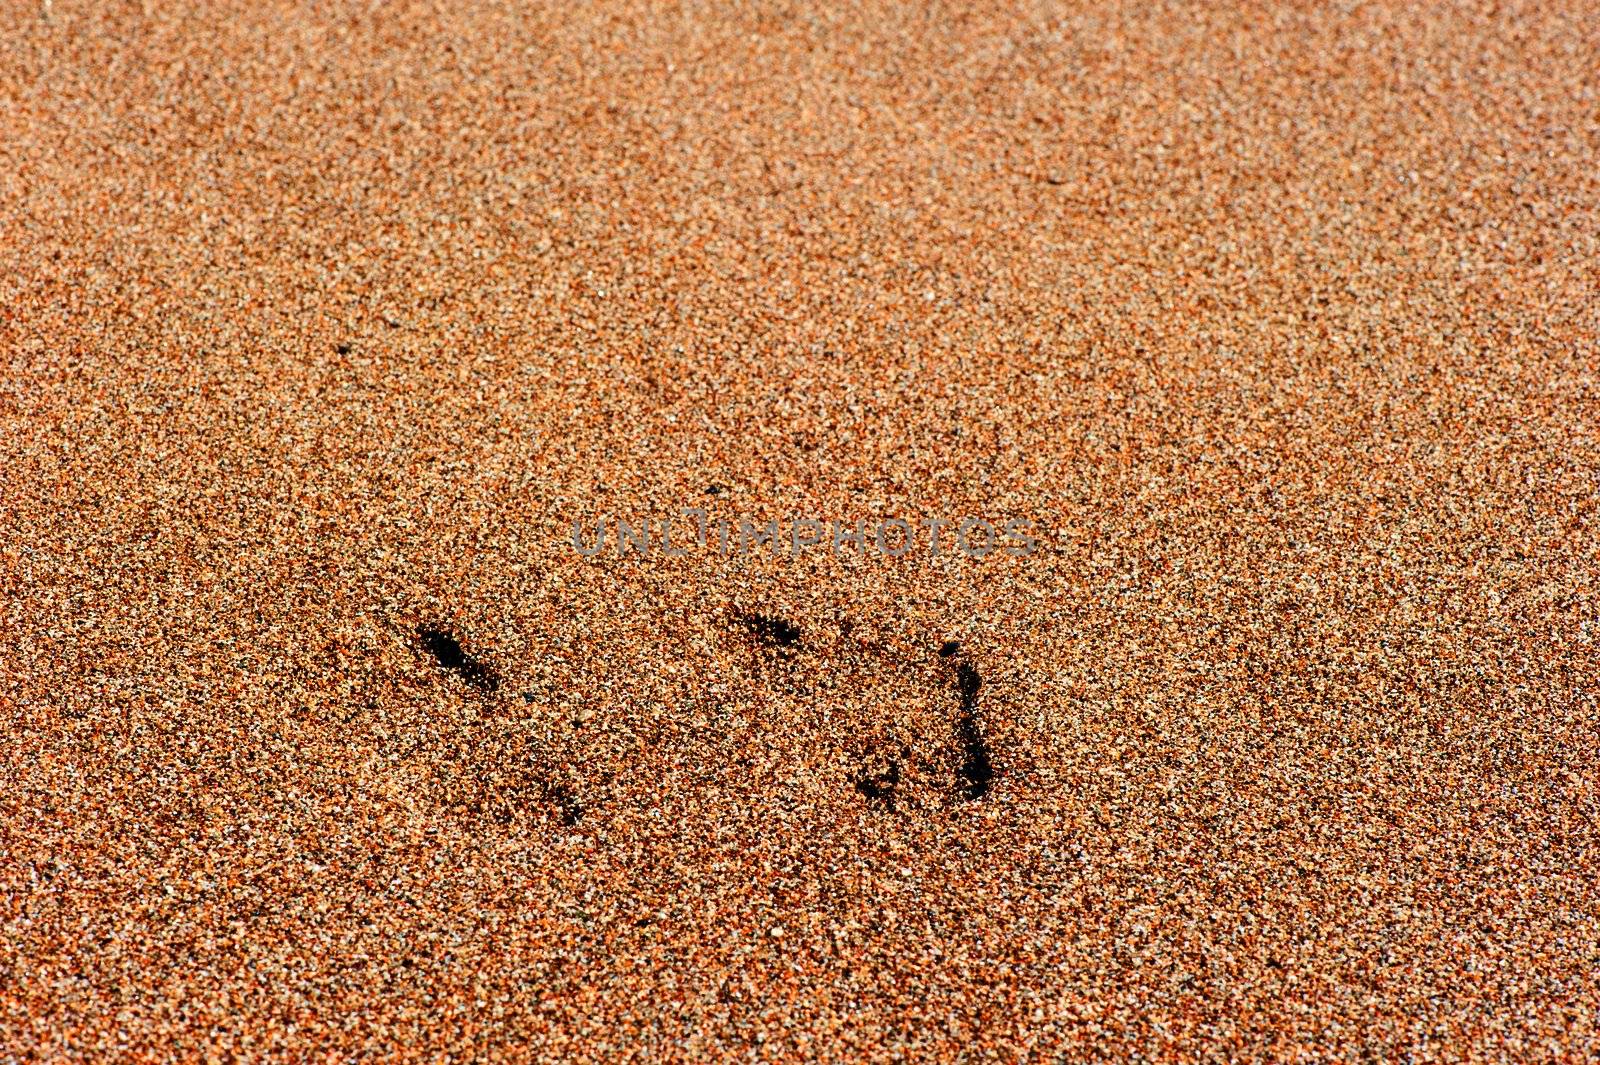 Traces of human feet in the sand beach by kosmsos111